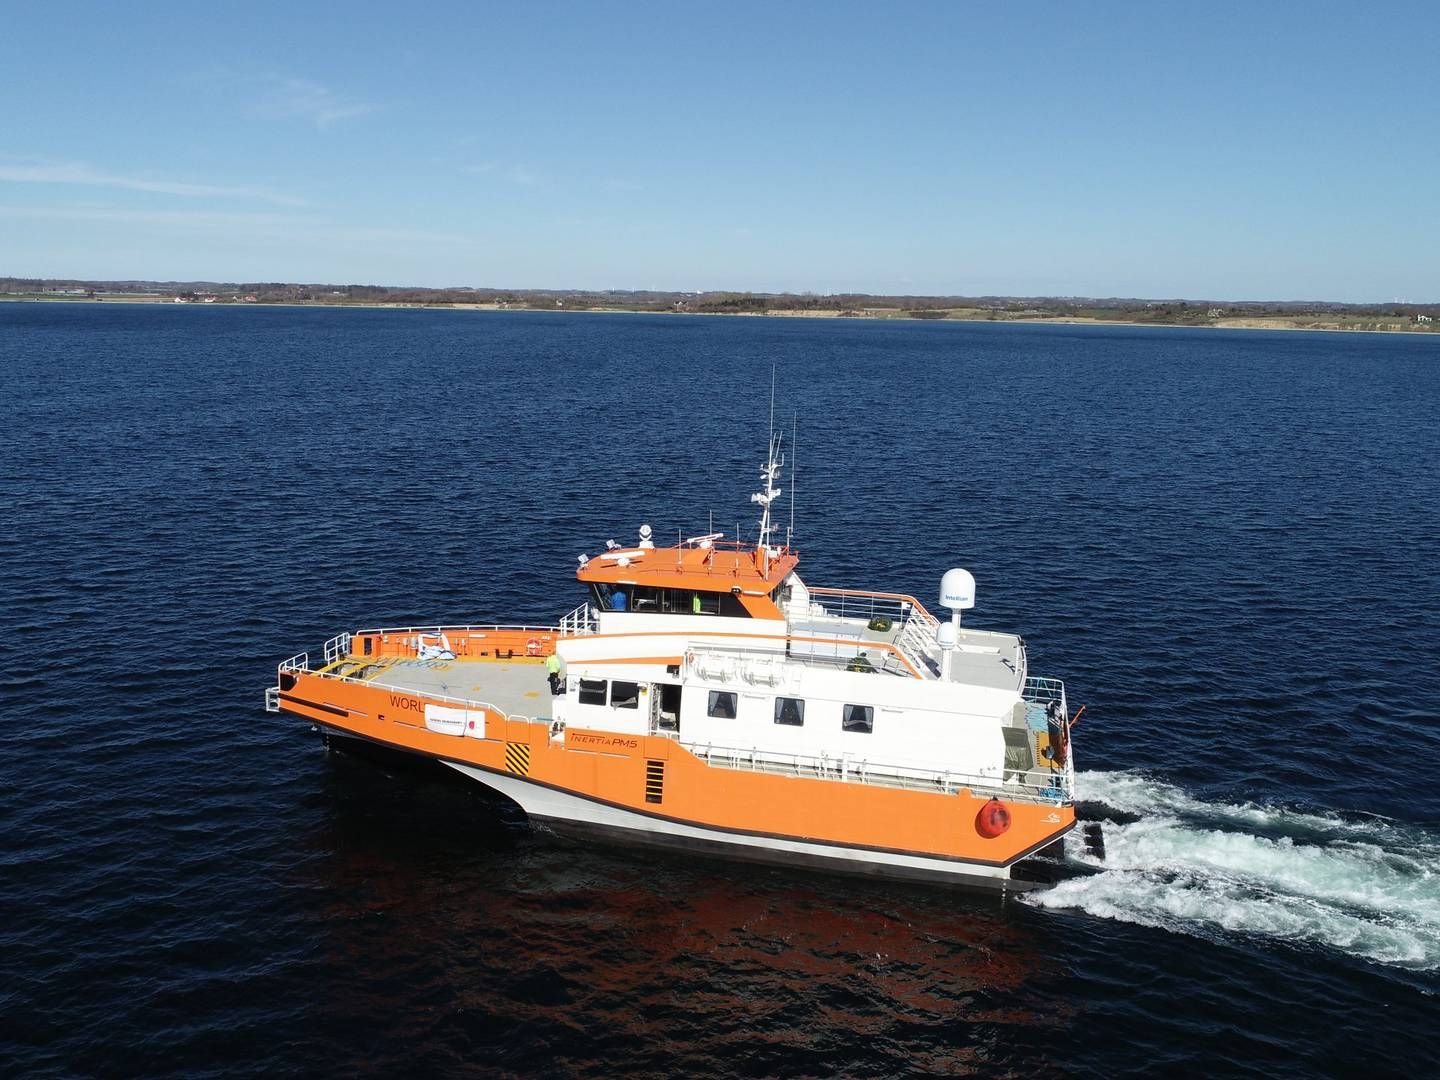 World Marine Offshore managed a fleet of smaller vessels used to transport crew to offshore wind farms. When the company went bankrupt, most vessels lay inactive in the Port of Esbjerg, though. | Foto: World Marine Offshore